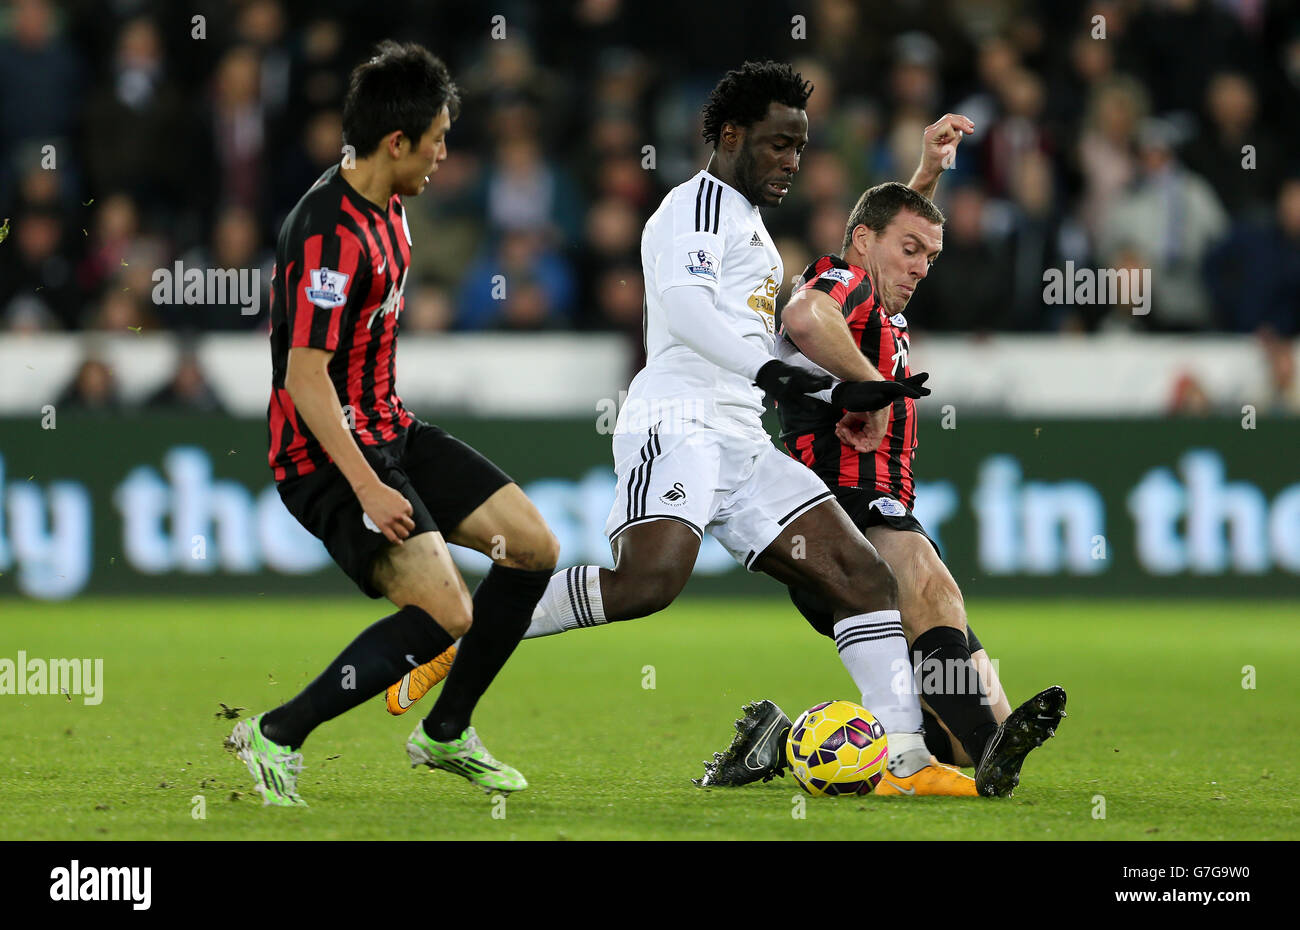 Swansea City's Wilfried Bony is challenged by Queens Park Rangers Yun Suk-Young and Richard Dunne during the Barclays Premier League match at the Liberty Stadium, Swansea. PRESS ASSOCIATION Photo. Picture date: Tuesday December 2, 2014. See PA story SOCCER Swansea. Photo credit should read: David Davies/PA Wire. . . Stock Photo